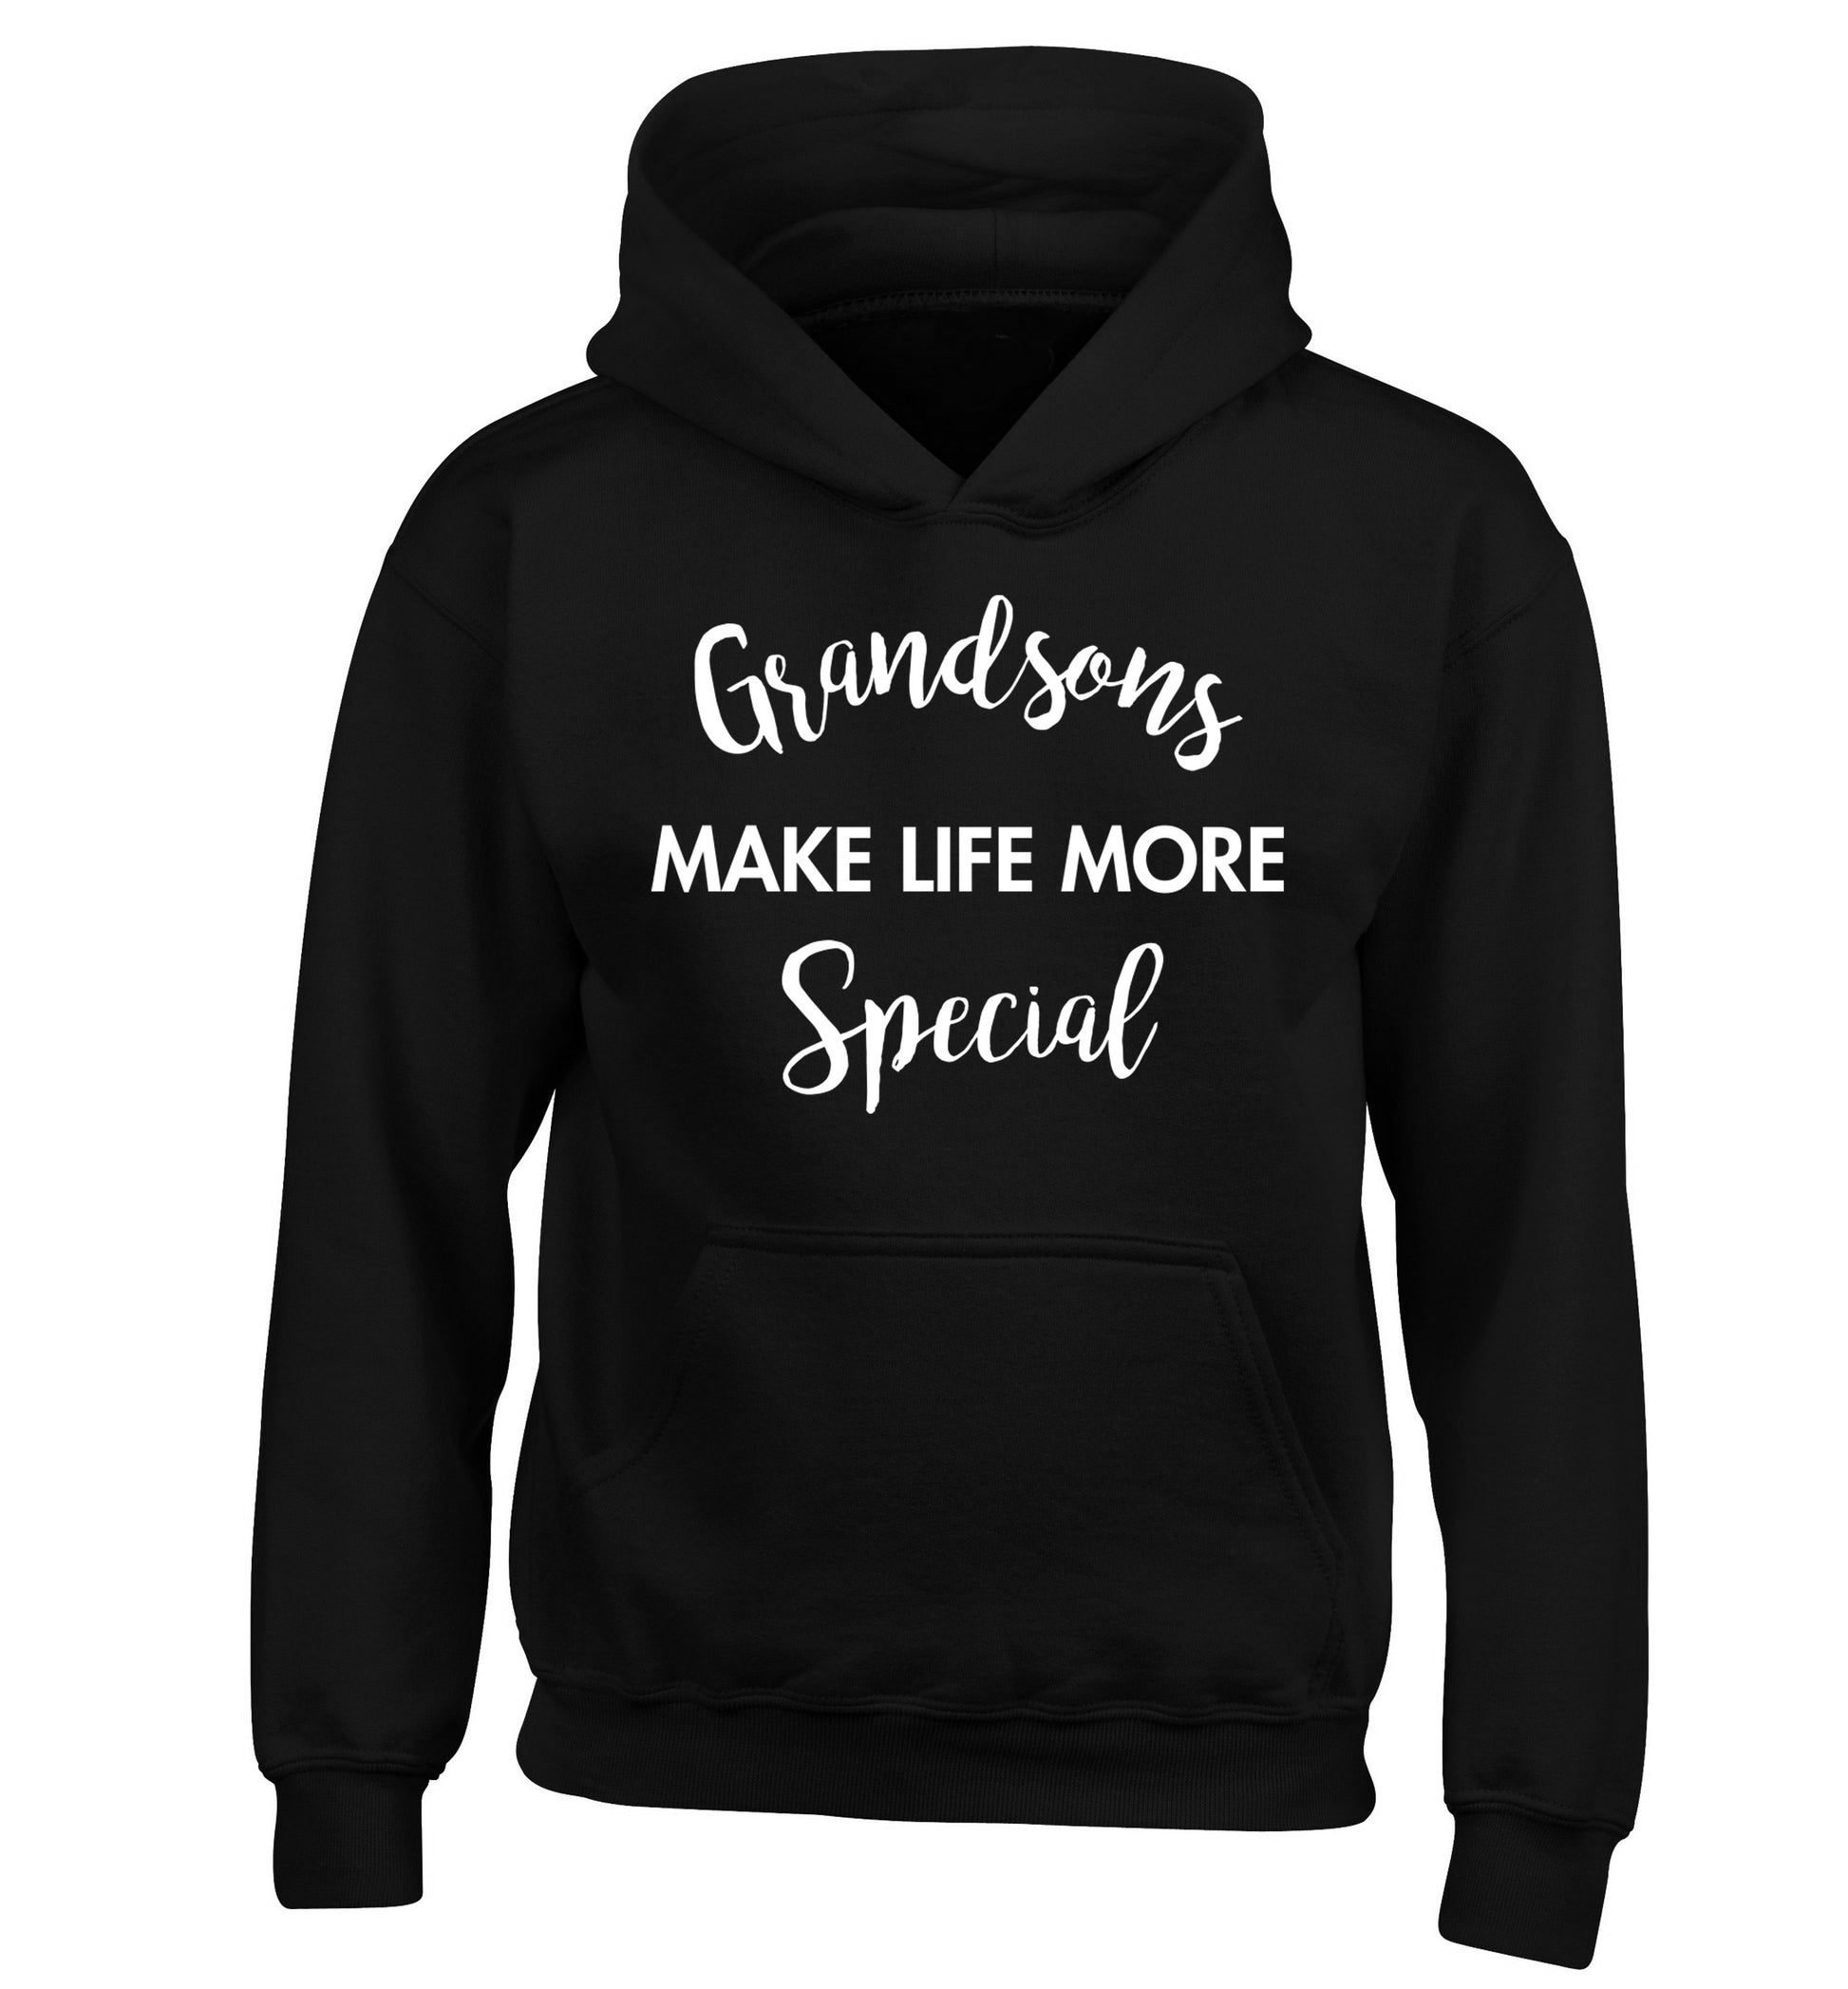 Grandsons make life more special children's black hoodie 12-14 Years